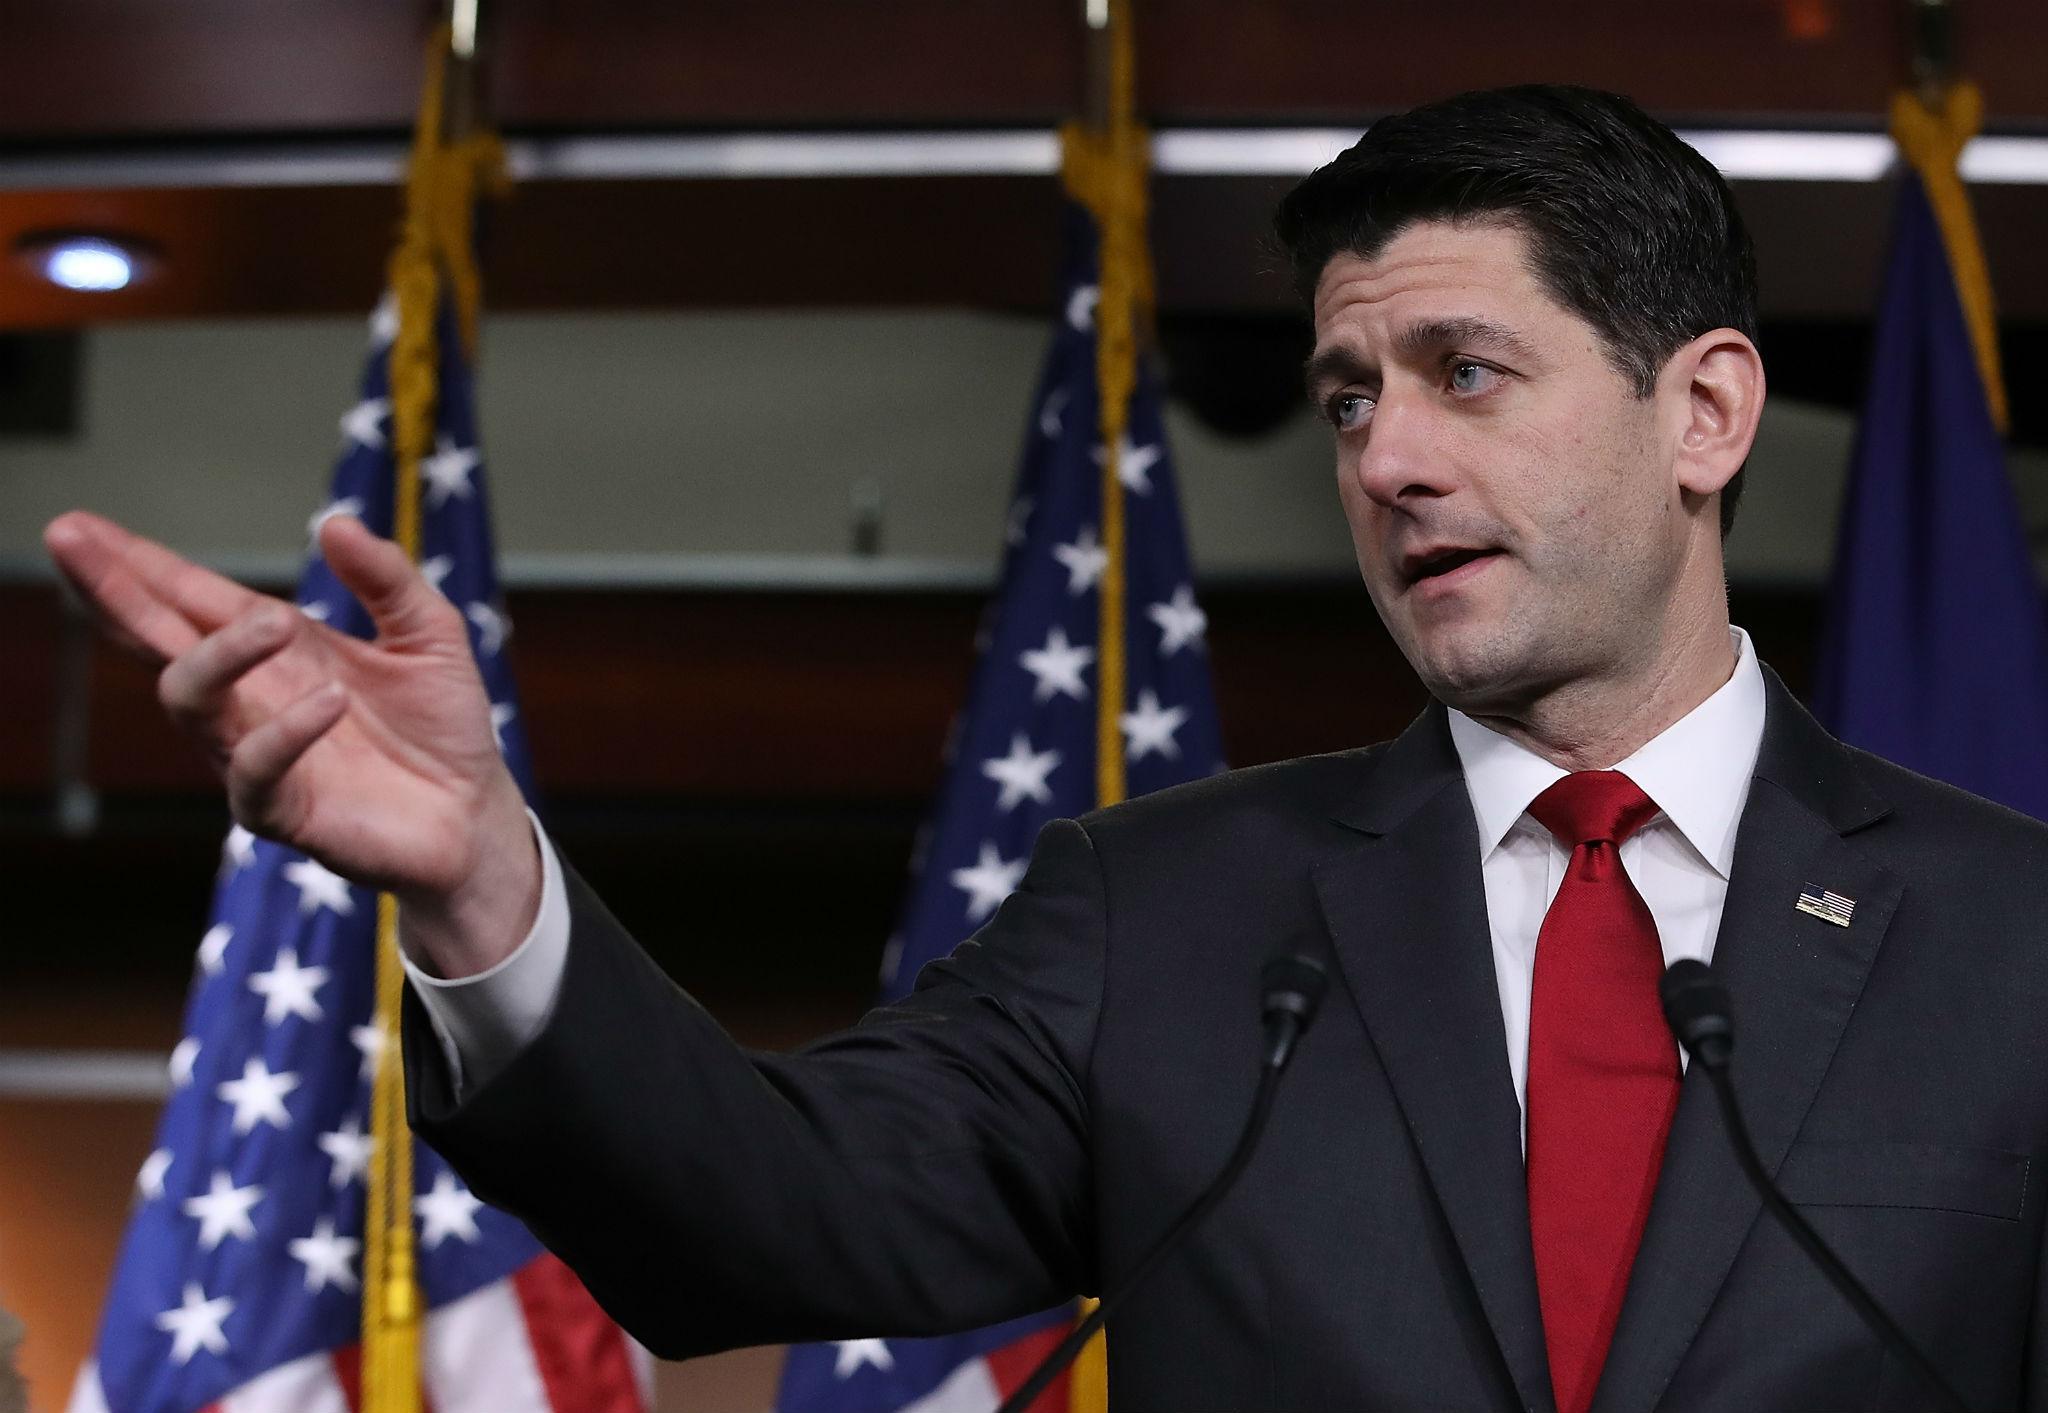 House Speaker Paul Ryan has expressed optimism about having the votes to pass a budget bill.